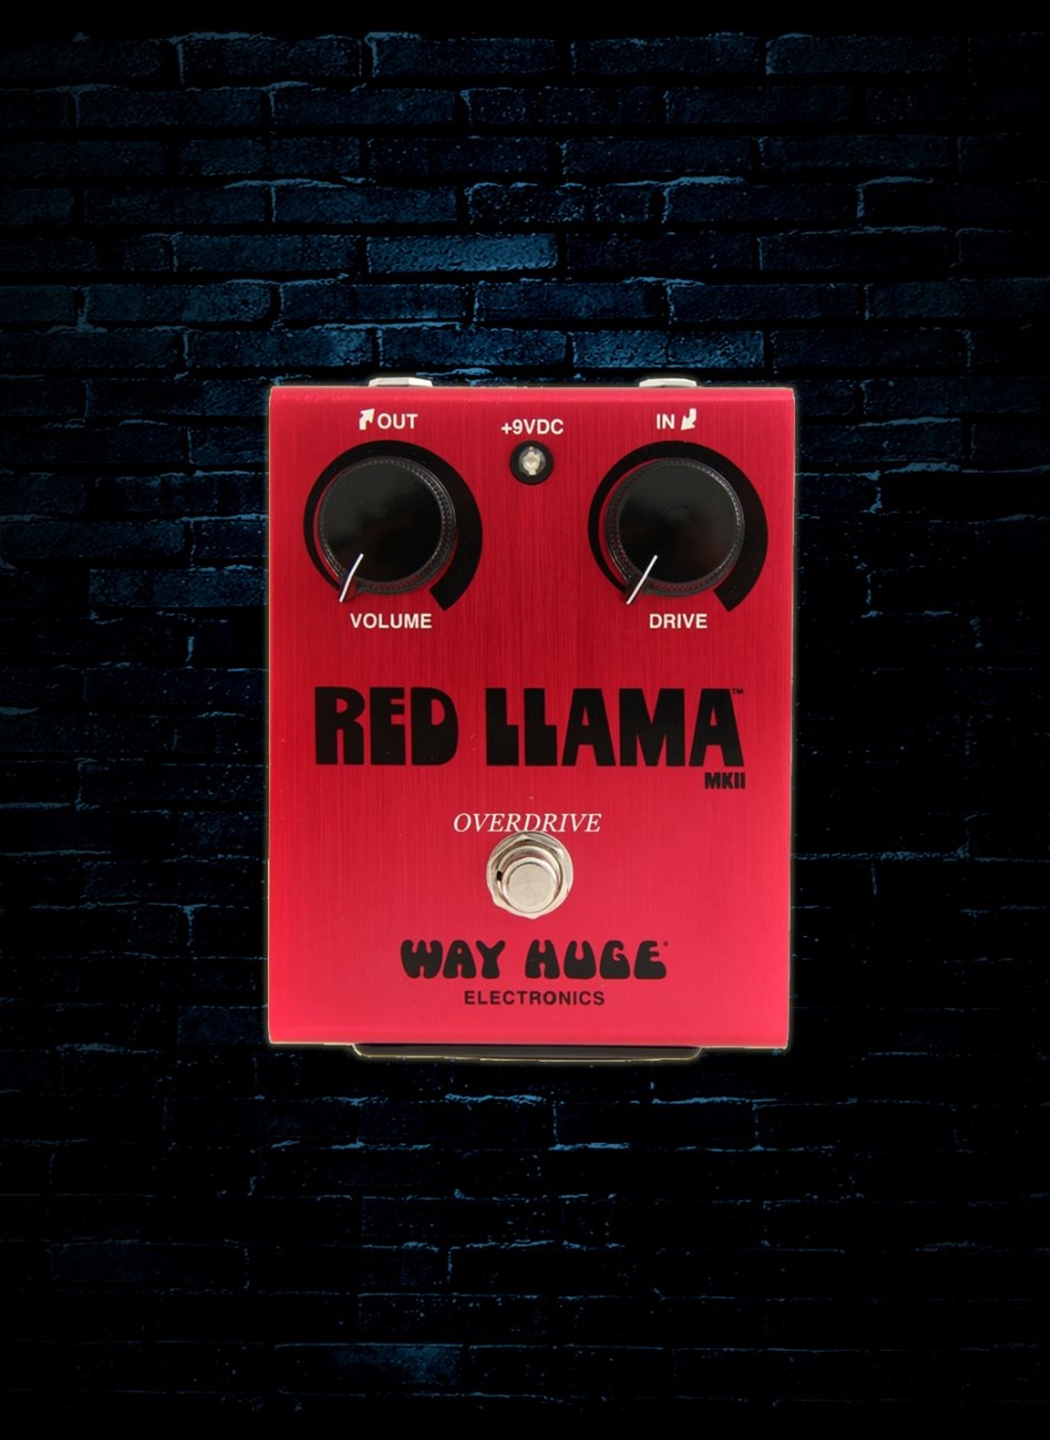 Way Huge WHE203 Red Llama Overdrive Pedal